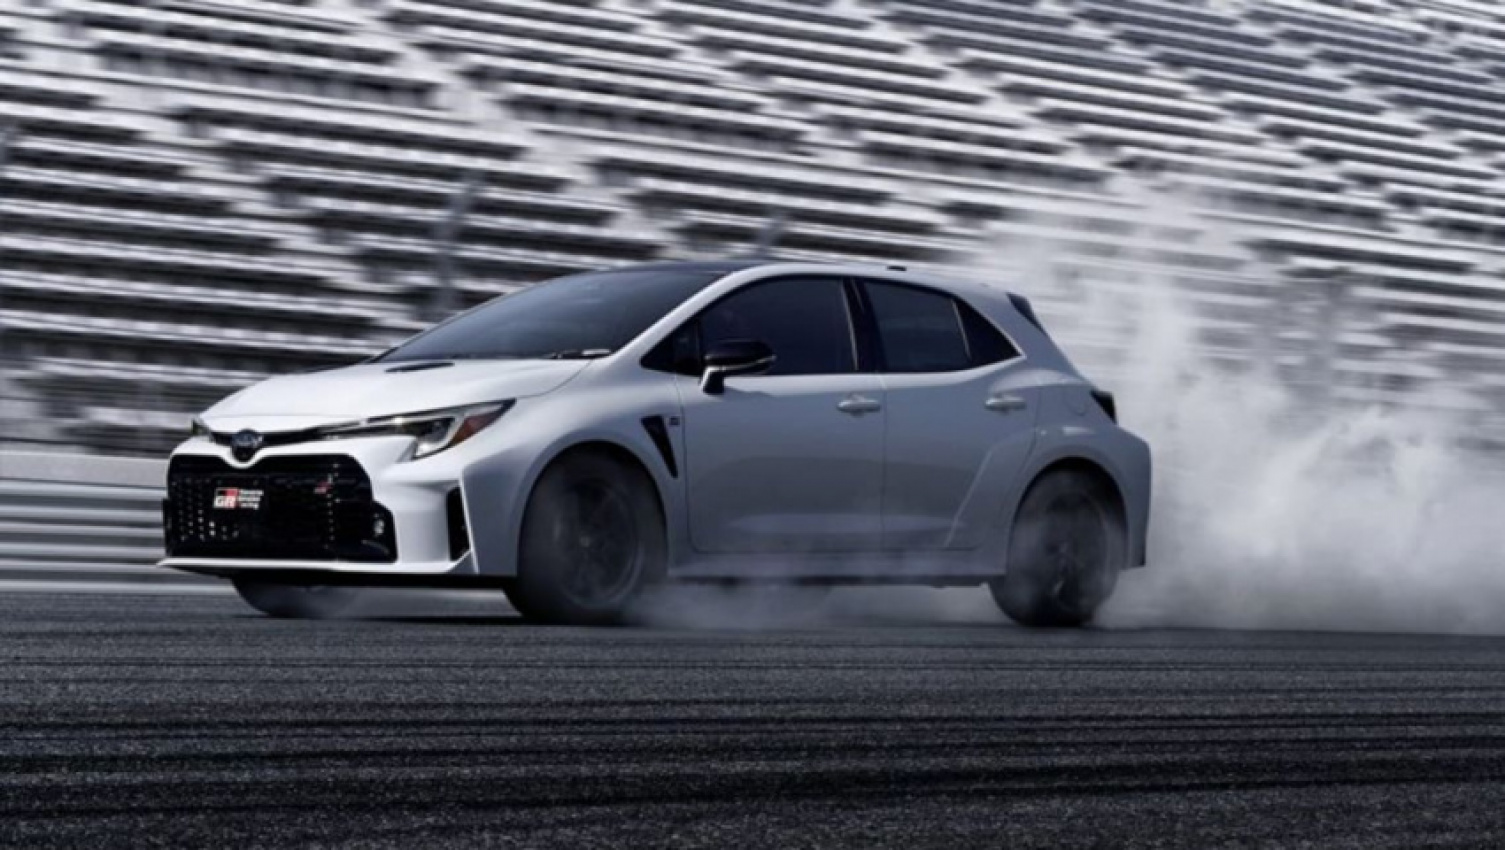 autos, cars, toyota, hatchback, hot hatches, industry news, showroom news, small cars, sports cars, toyota corolla, toyota corolla 2022, toyota hatchback range, toyota news, three year wait times quoted for gr corolla in australia as limited supply and soaring demand hit yet another toyota